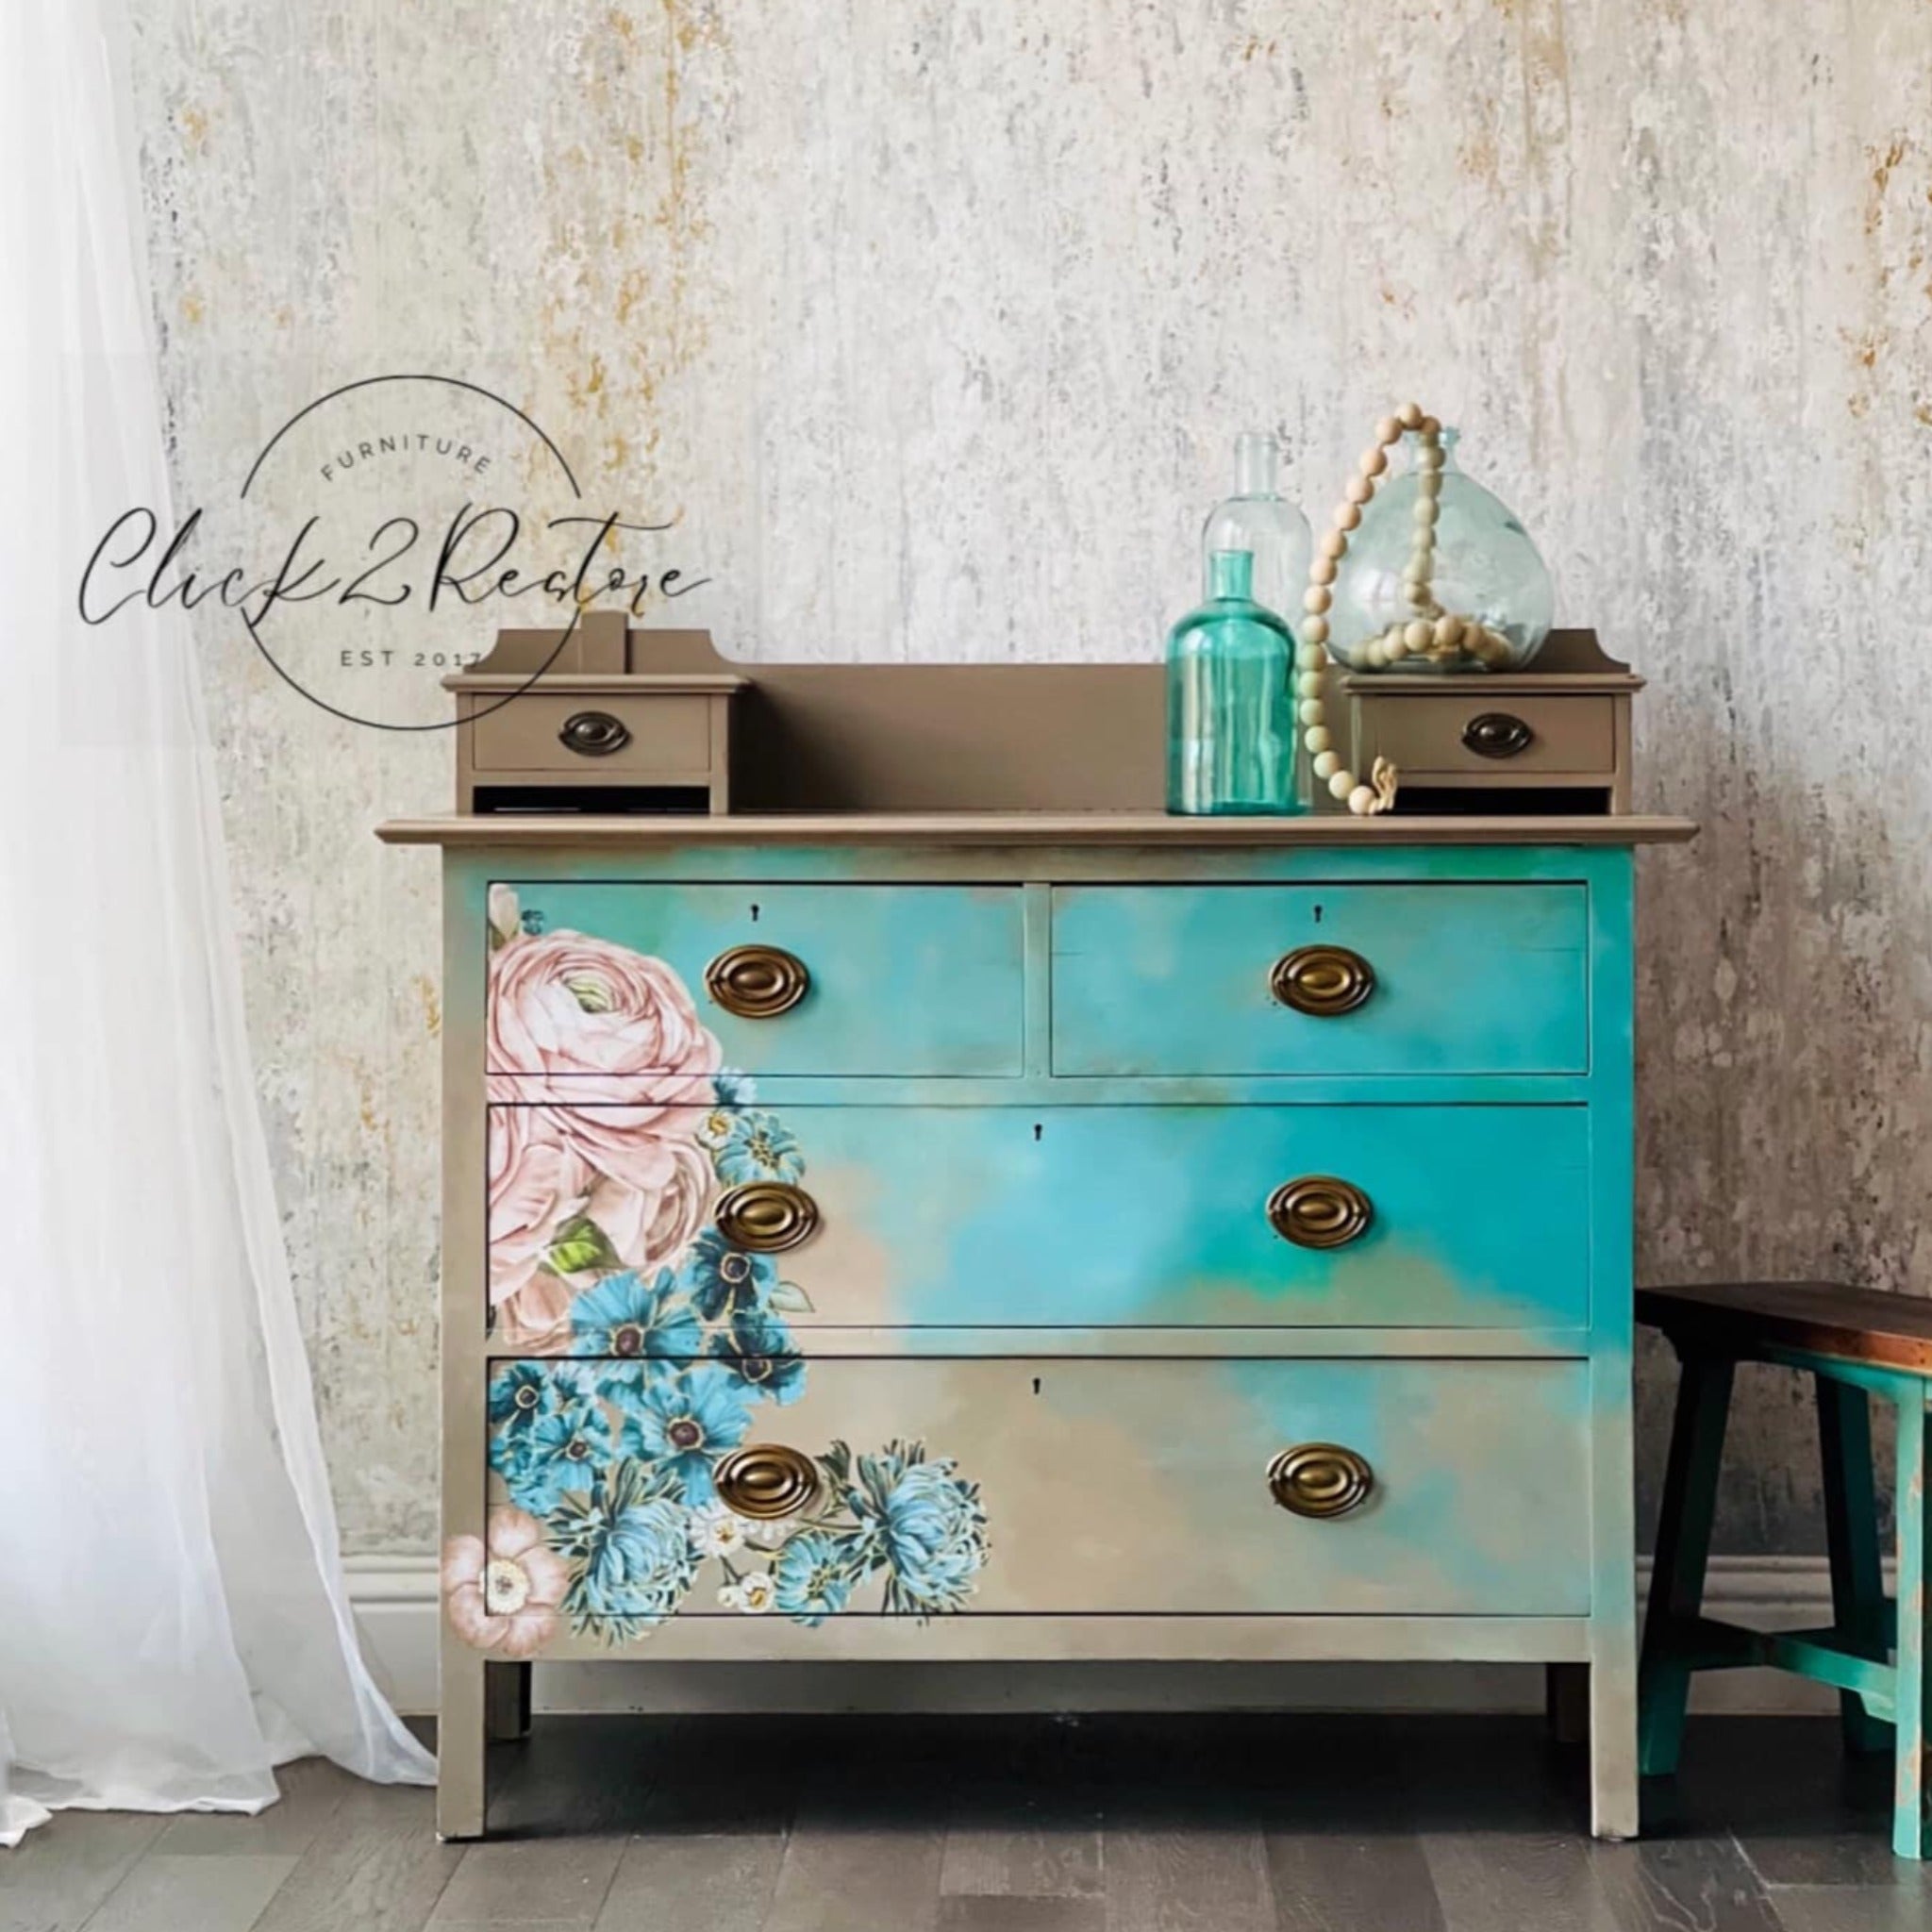 A 4-drawer dresser refurbished by Click 2 Restore is painted a blend of light and medium tan and bright teal and features ReDesign with Prima's Gilded Floral small transfer towards the bottom left corner of the dresser front.